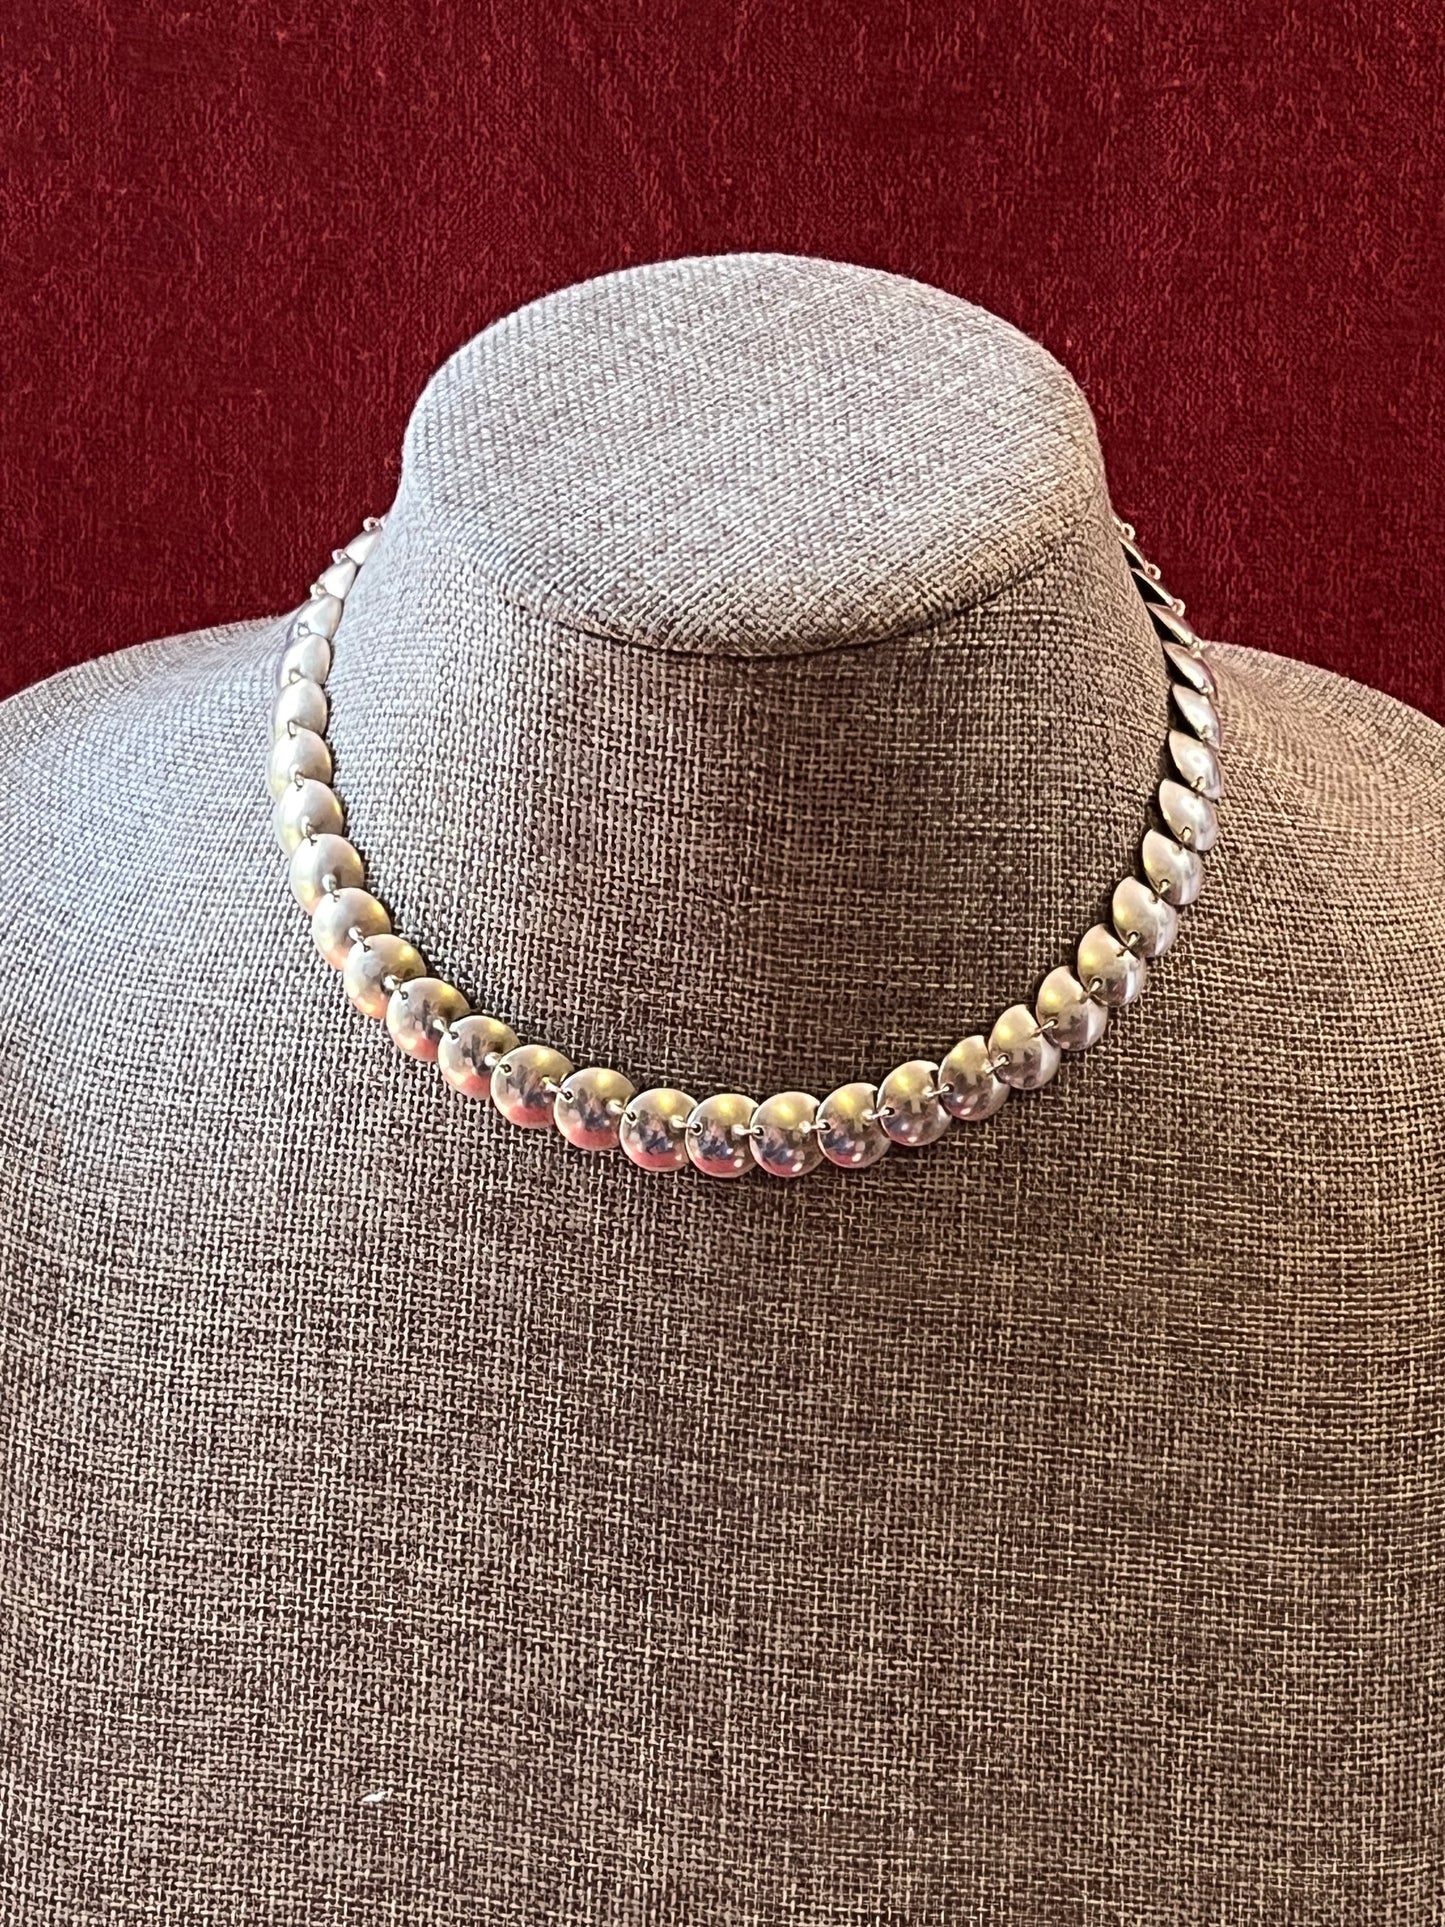 Sterling Disk Necklace by Kathy Lynn Mayeda